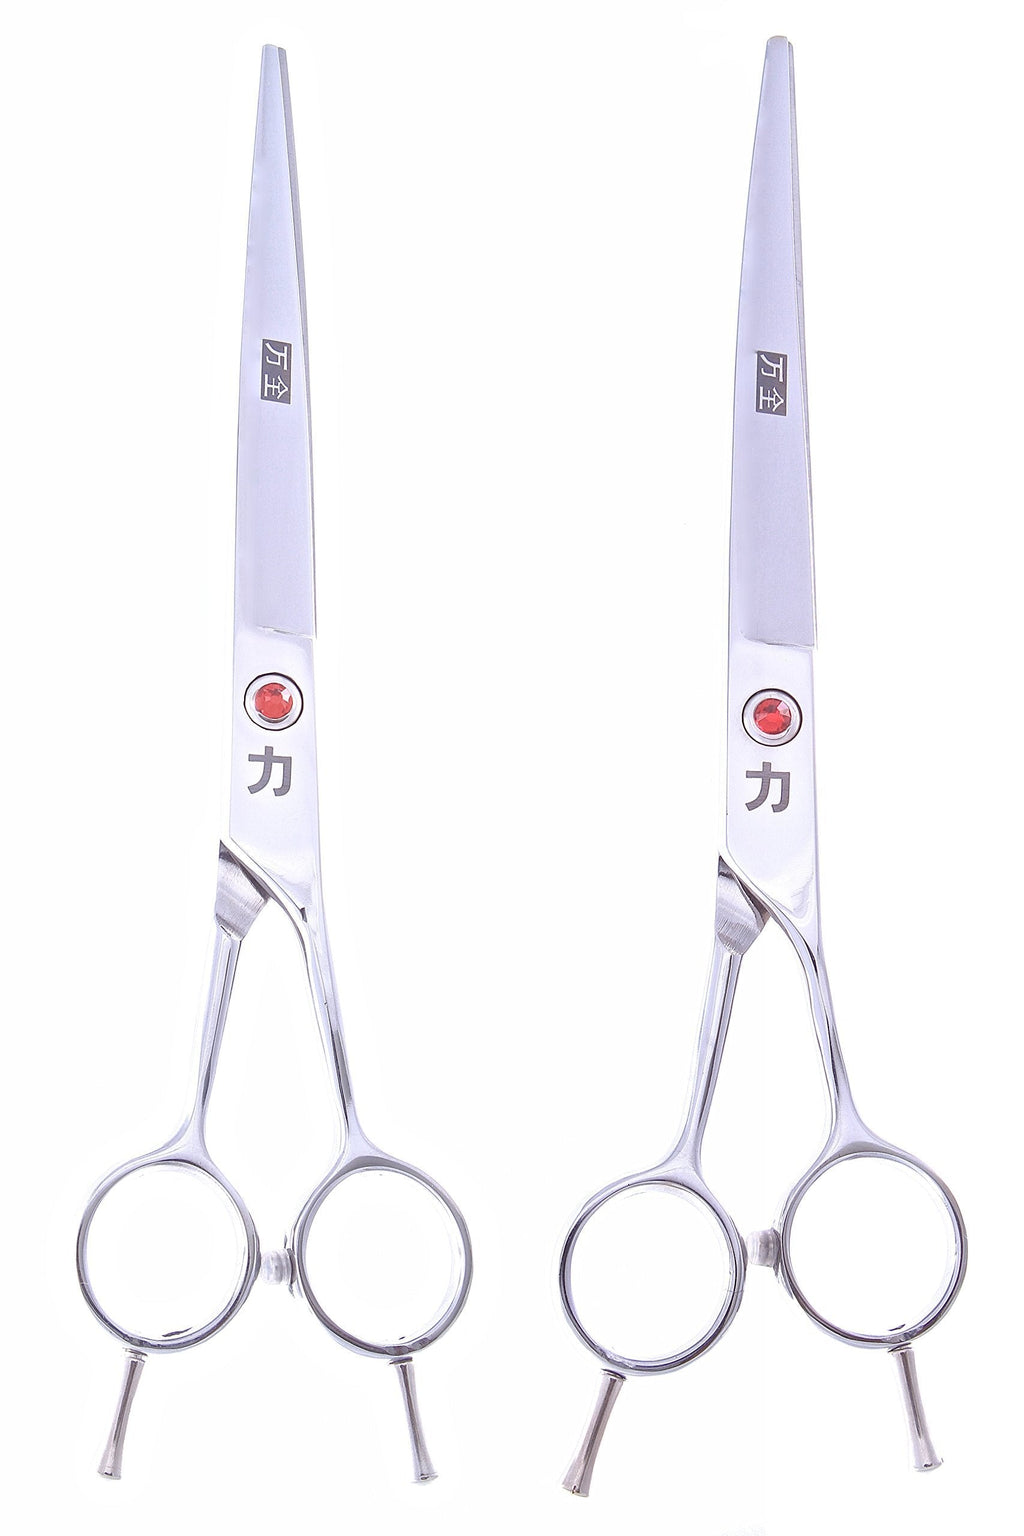 [Australia] - ShearsDirect Professional Japanese Stainless 7.5-Inch Straight and Curved Grooming Shears with Opposing Handle, Set of 2 